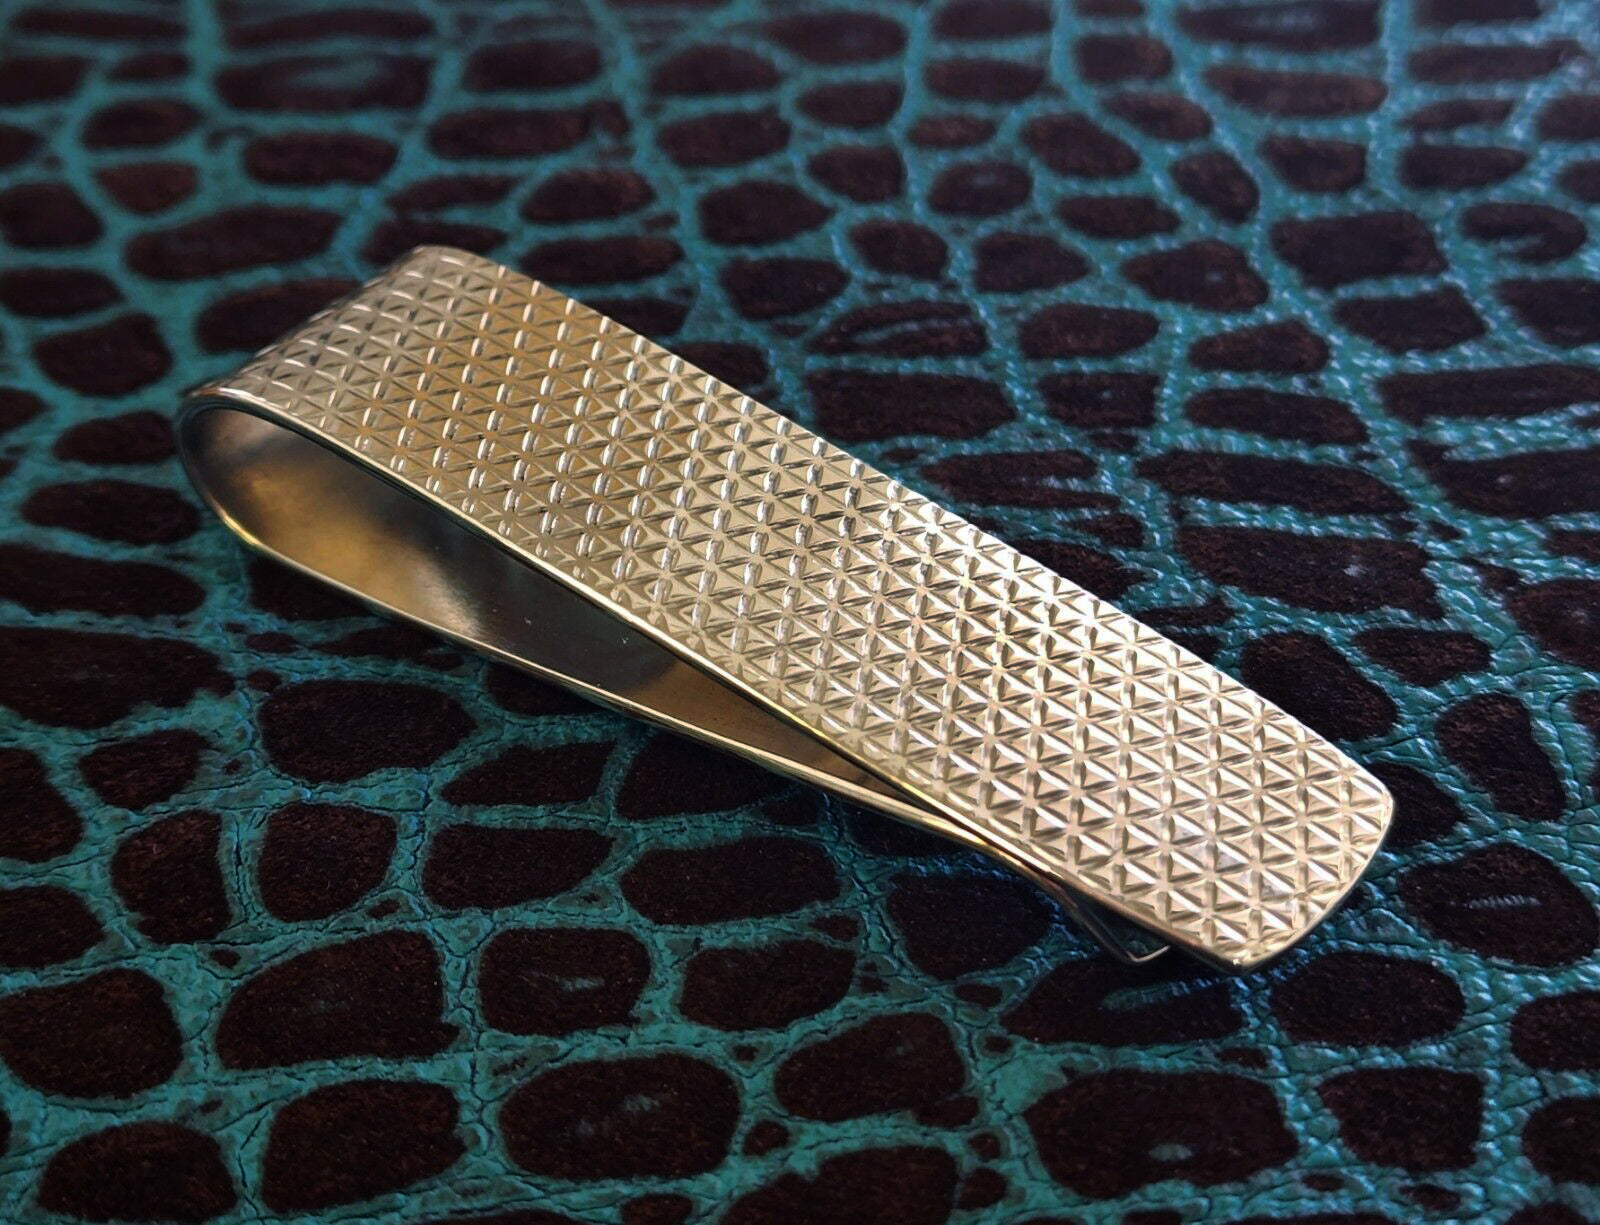 Tetrahedron Classic 935 Argentium Sterling Silver Money Clip by Phantom